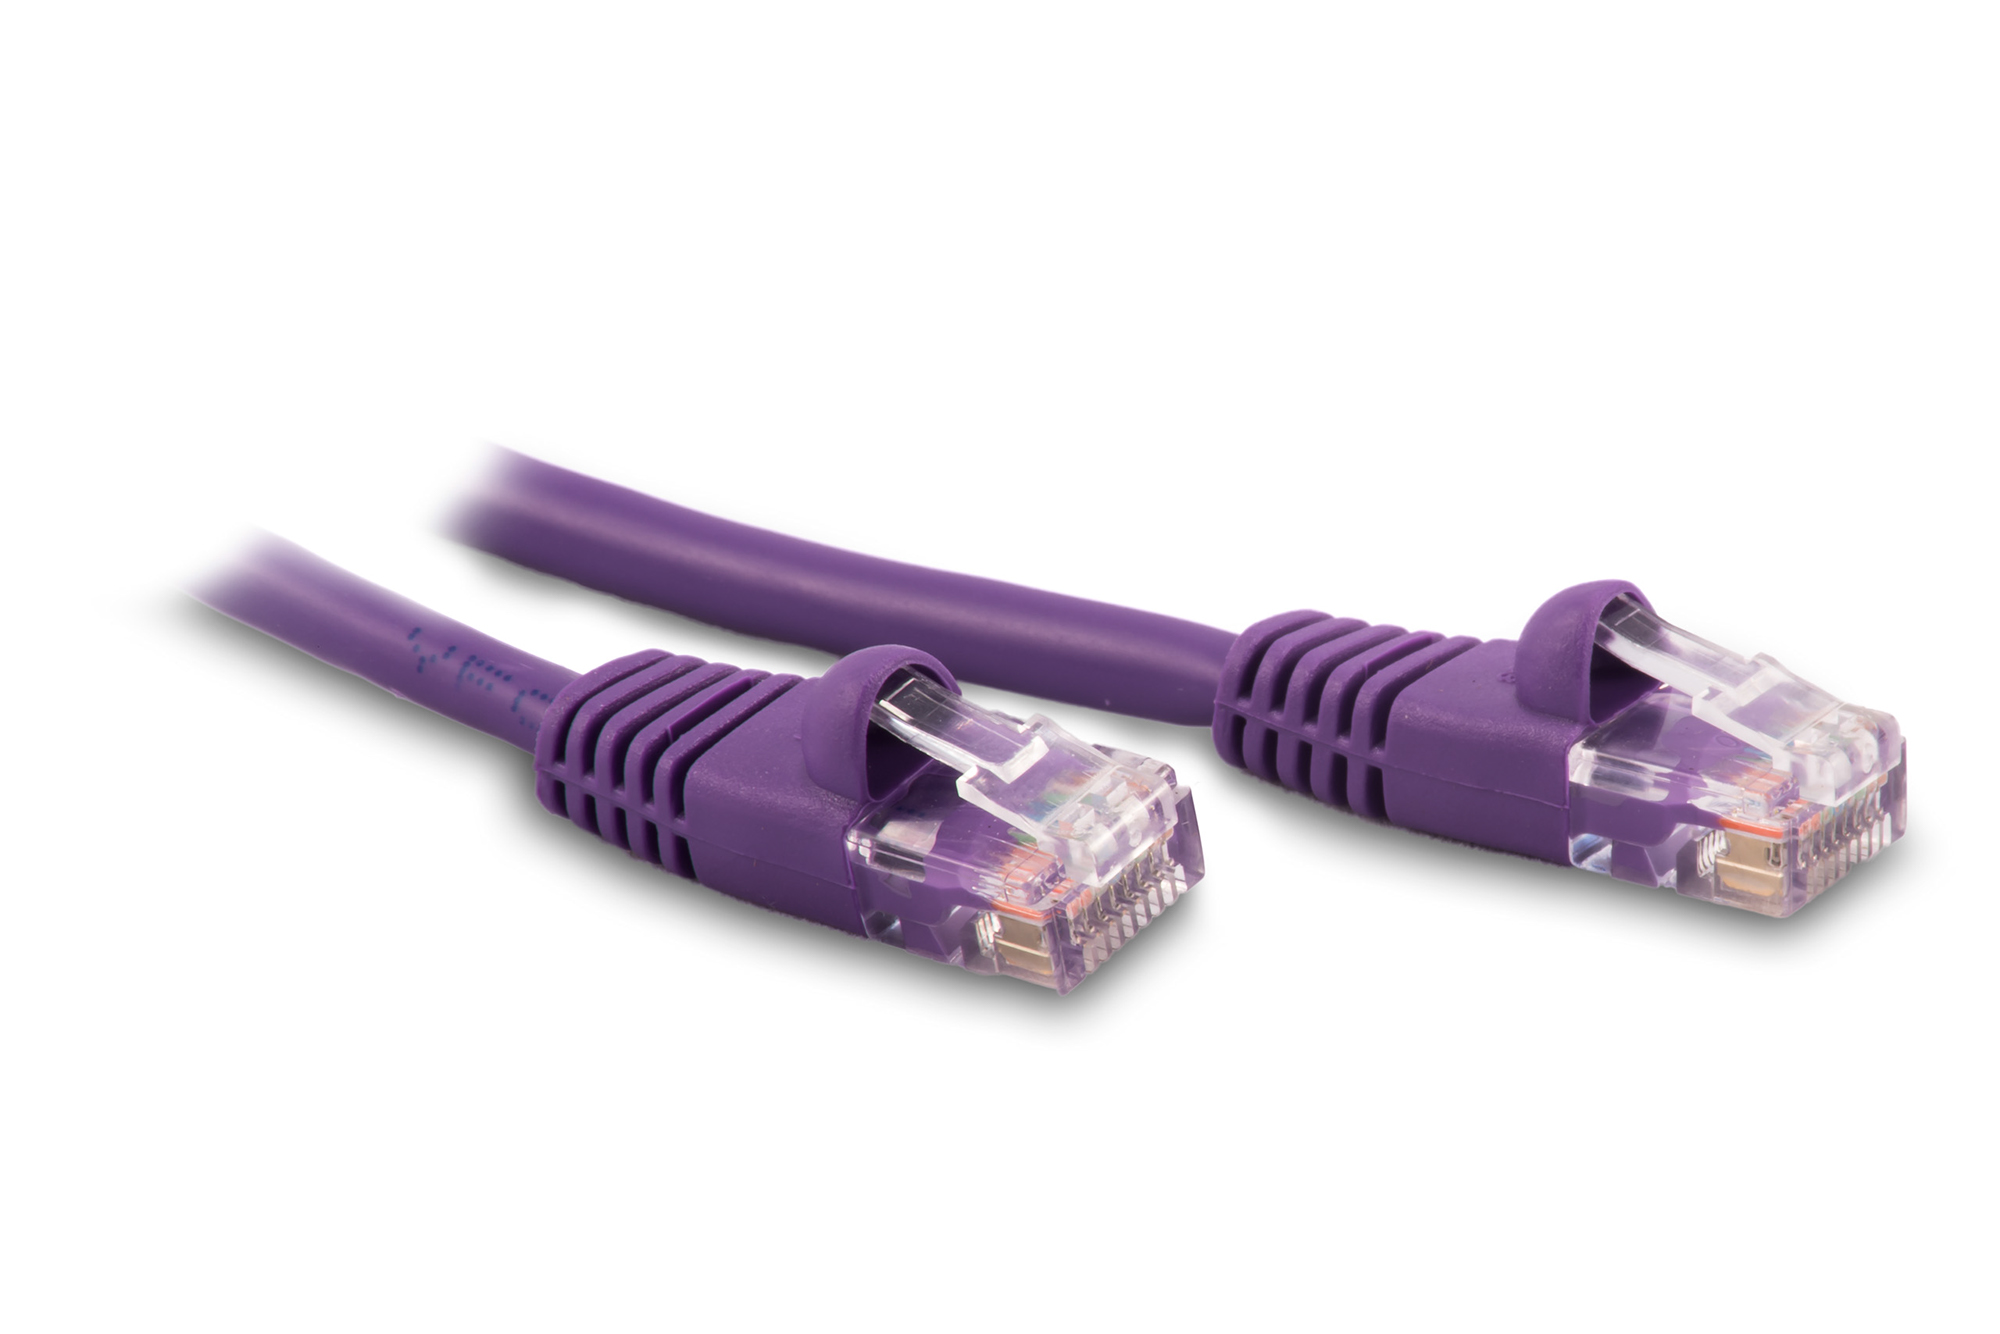 8ft Cat6 Ethernet Patch Cable - Violet Color - Snagless Boot